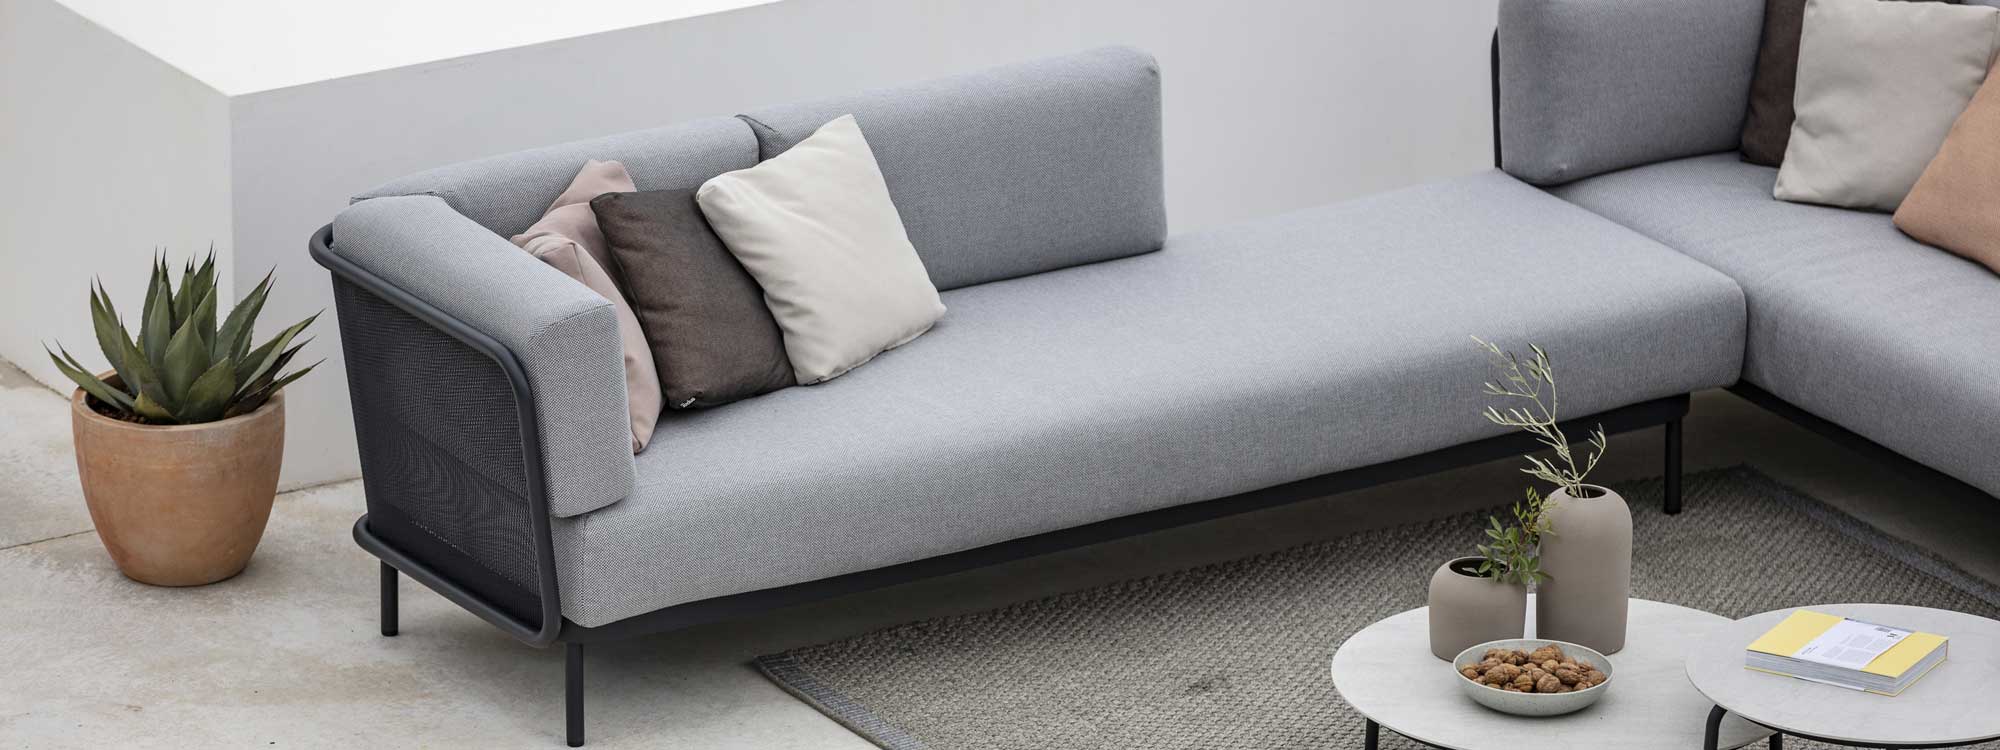 Image of Baza grey garden sofa and Starling ceramic low tables by Todus